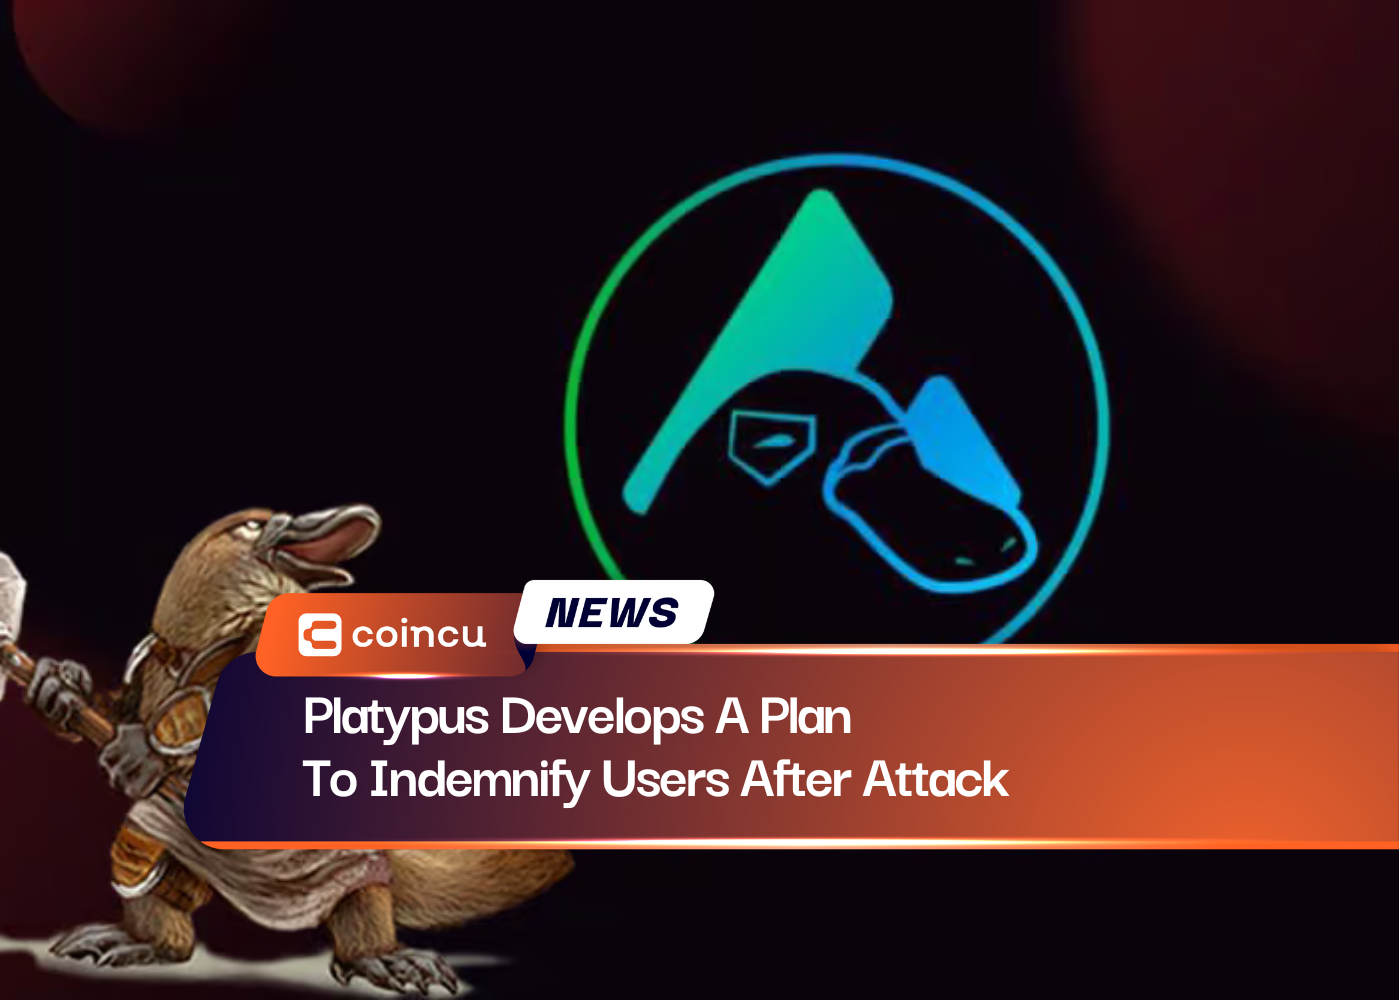 Platypus Develops A Plan To Indemnify Users After Attack